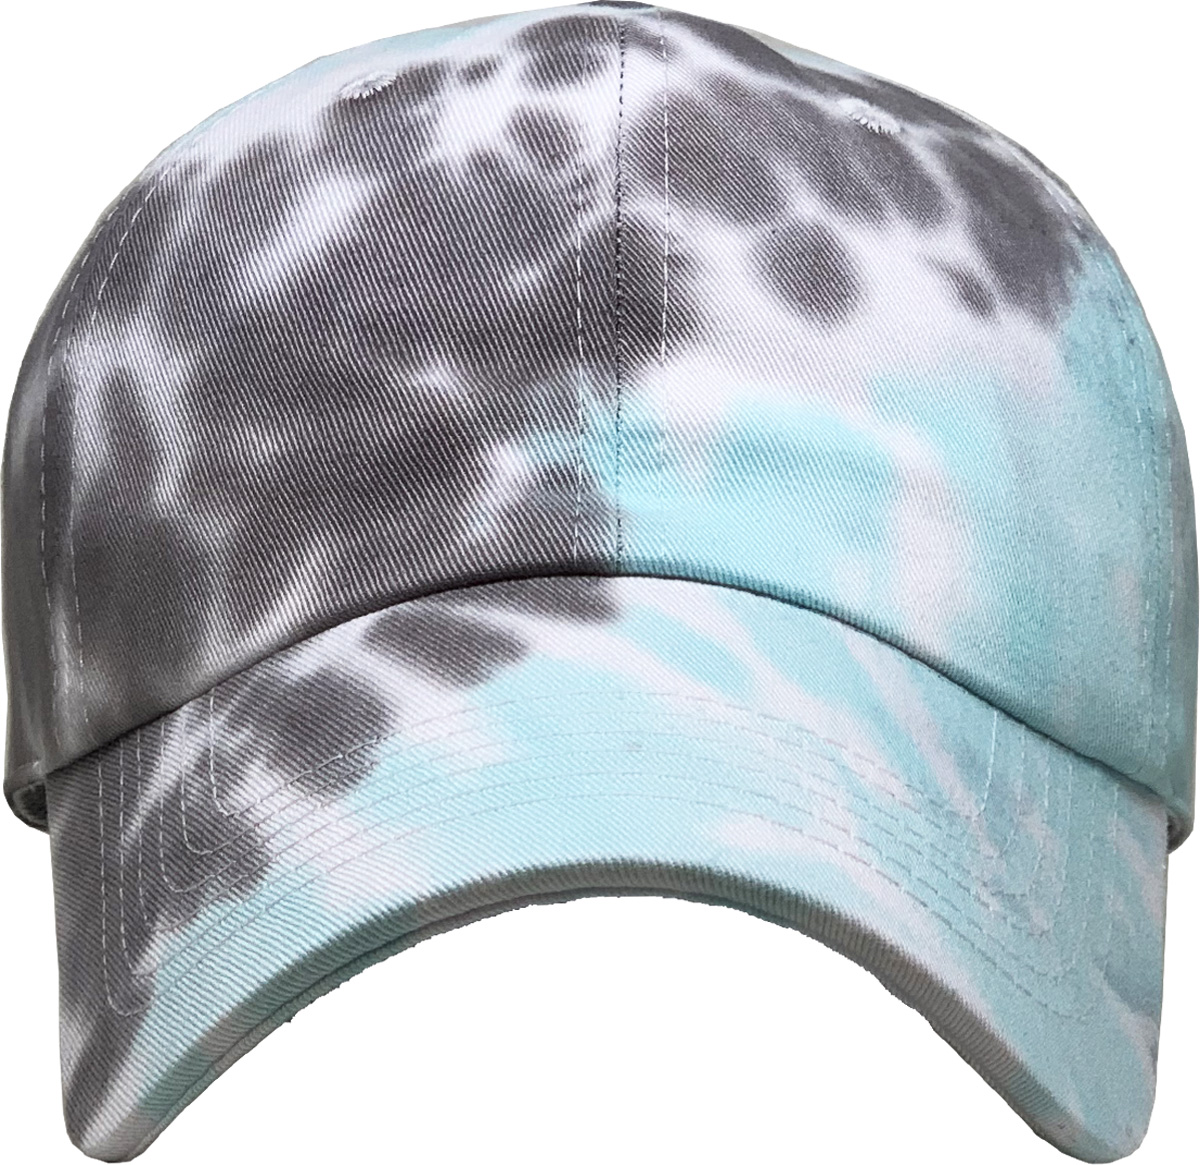 Tie Dye Classic Dad Hat Cotton Adjustable Baseball Cap Polo Style - image 2 of 6